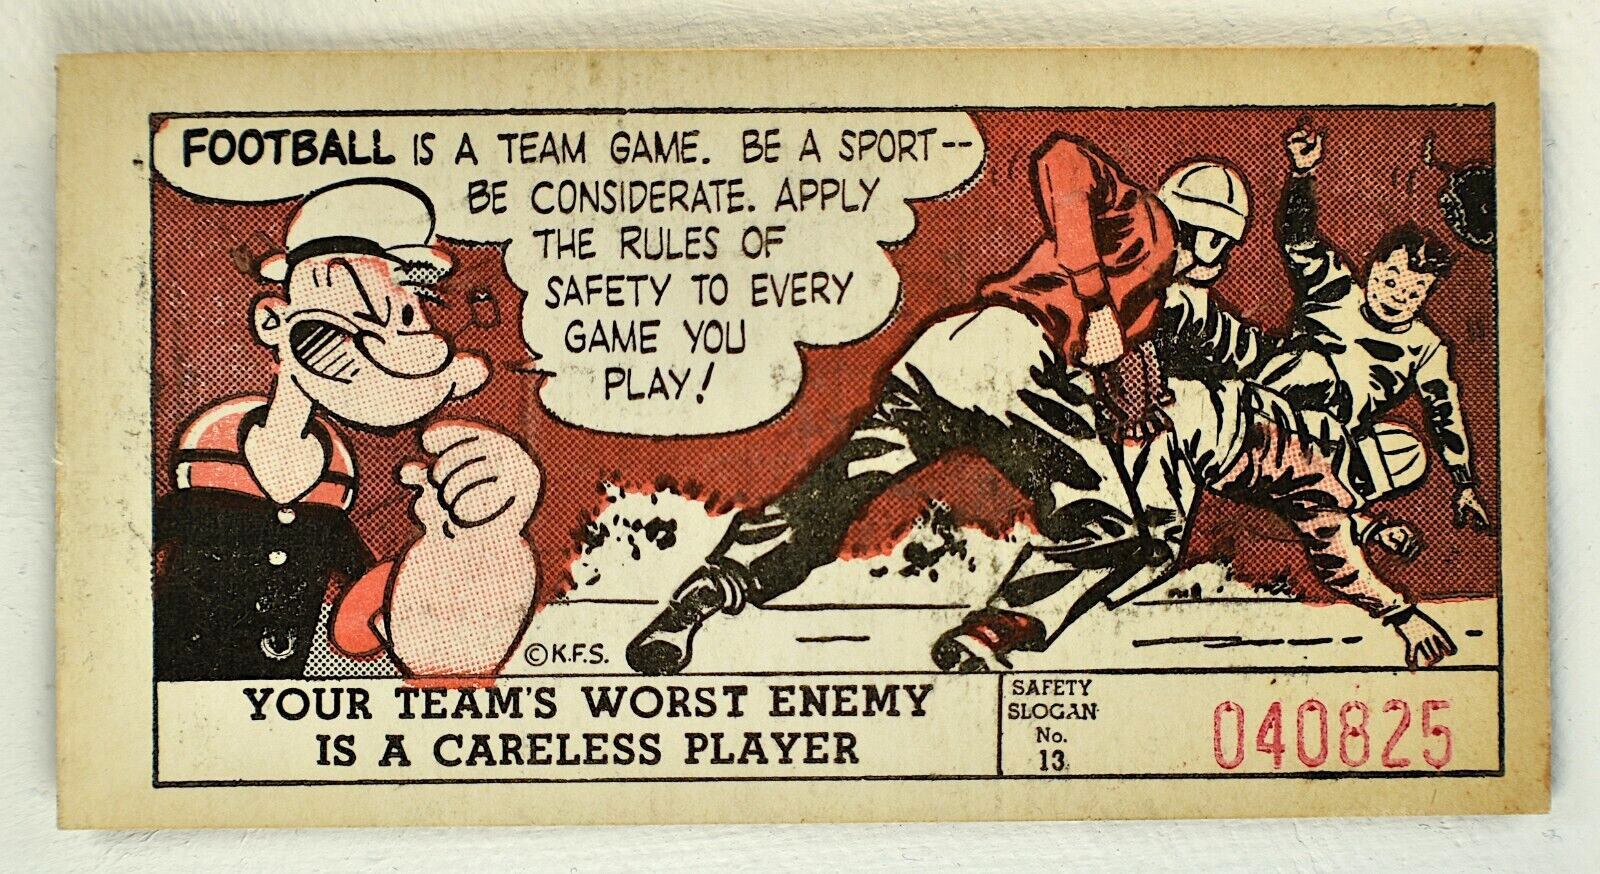 POPEYE FOOTBALL LUCKY SAFETY CARD #13 THE ALBANY TIMES-UNION, 1953